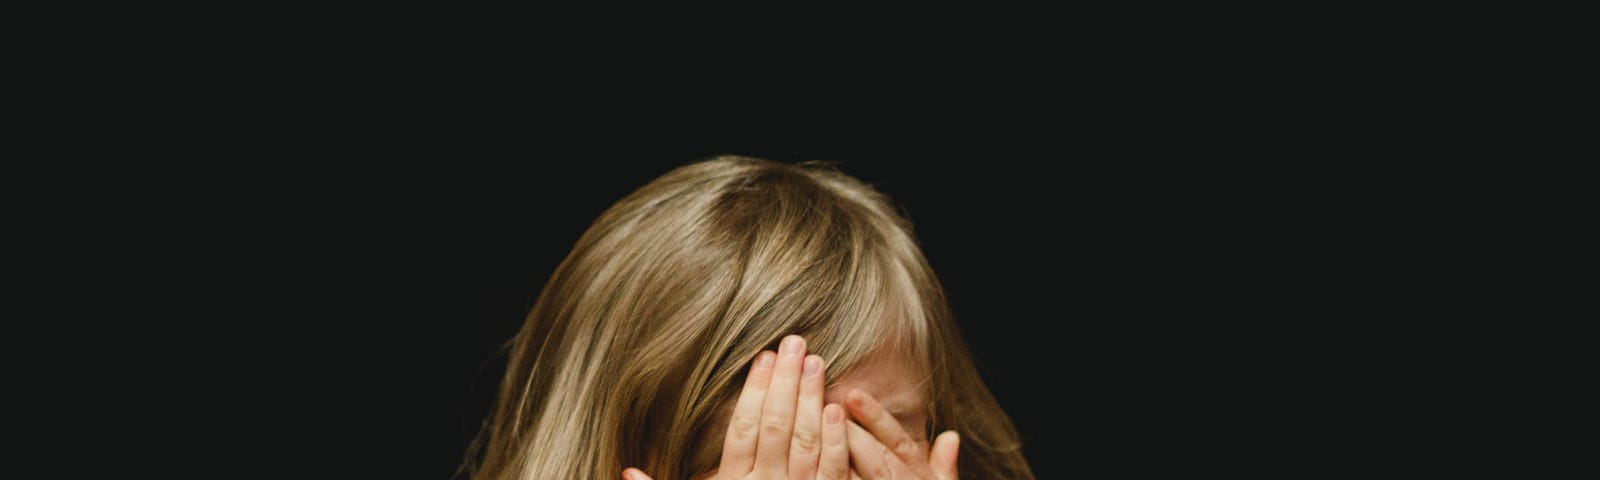 A small girl covering her face with her hands.